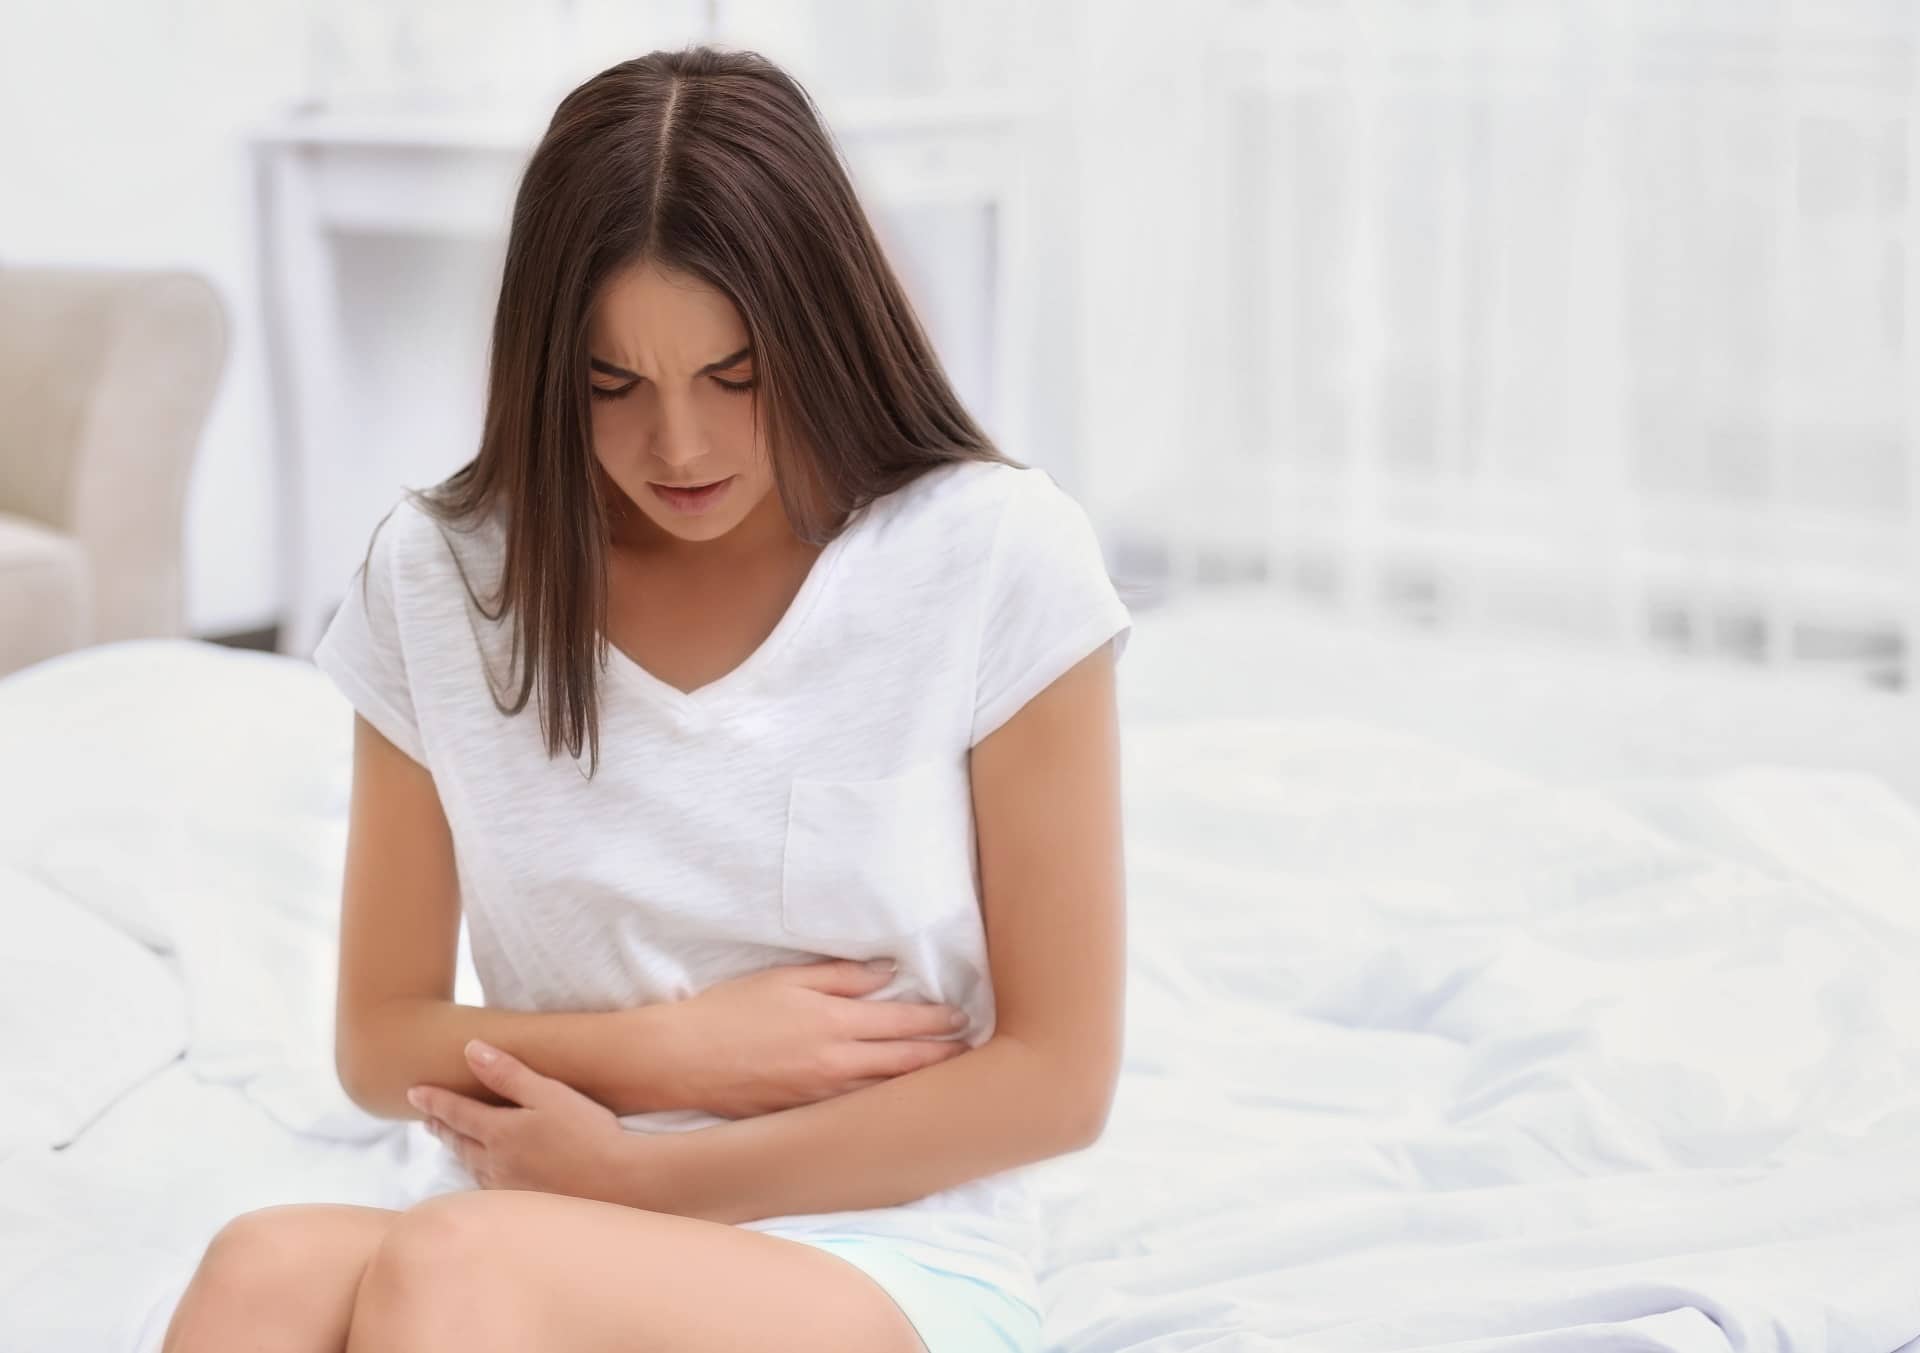 Can Women Conceive With PCOS - Do You Know the Difference Between Implantation and Period?